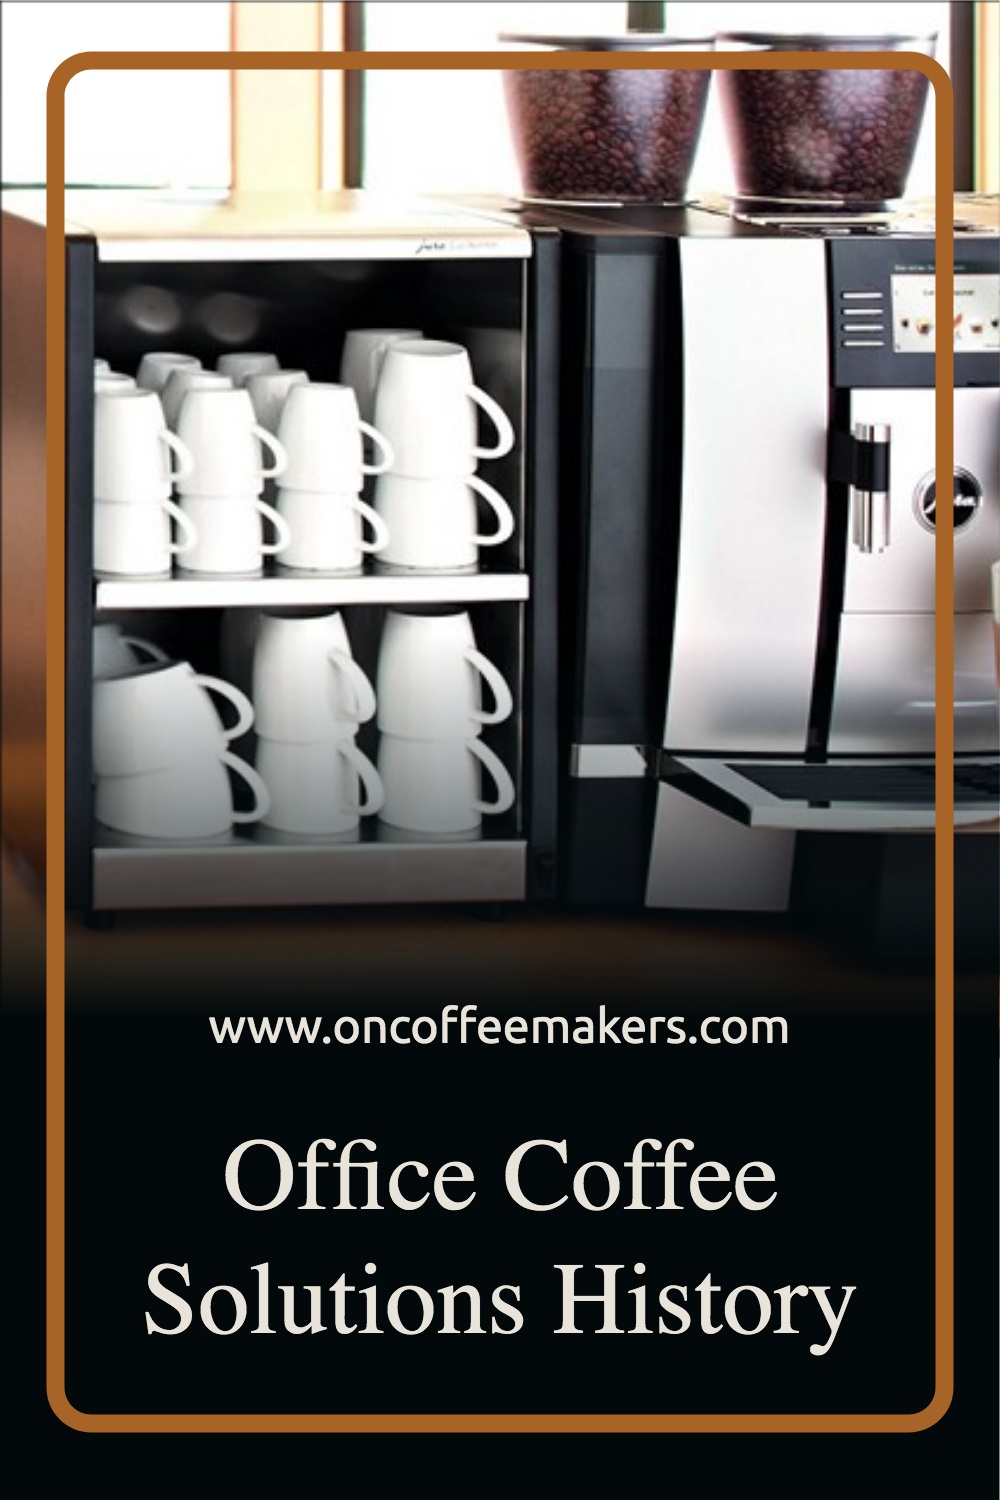 Office-Coffee-Solutions-History.jpg